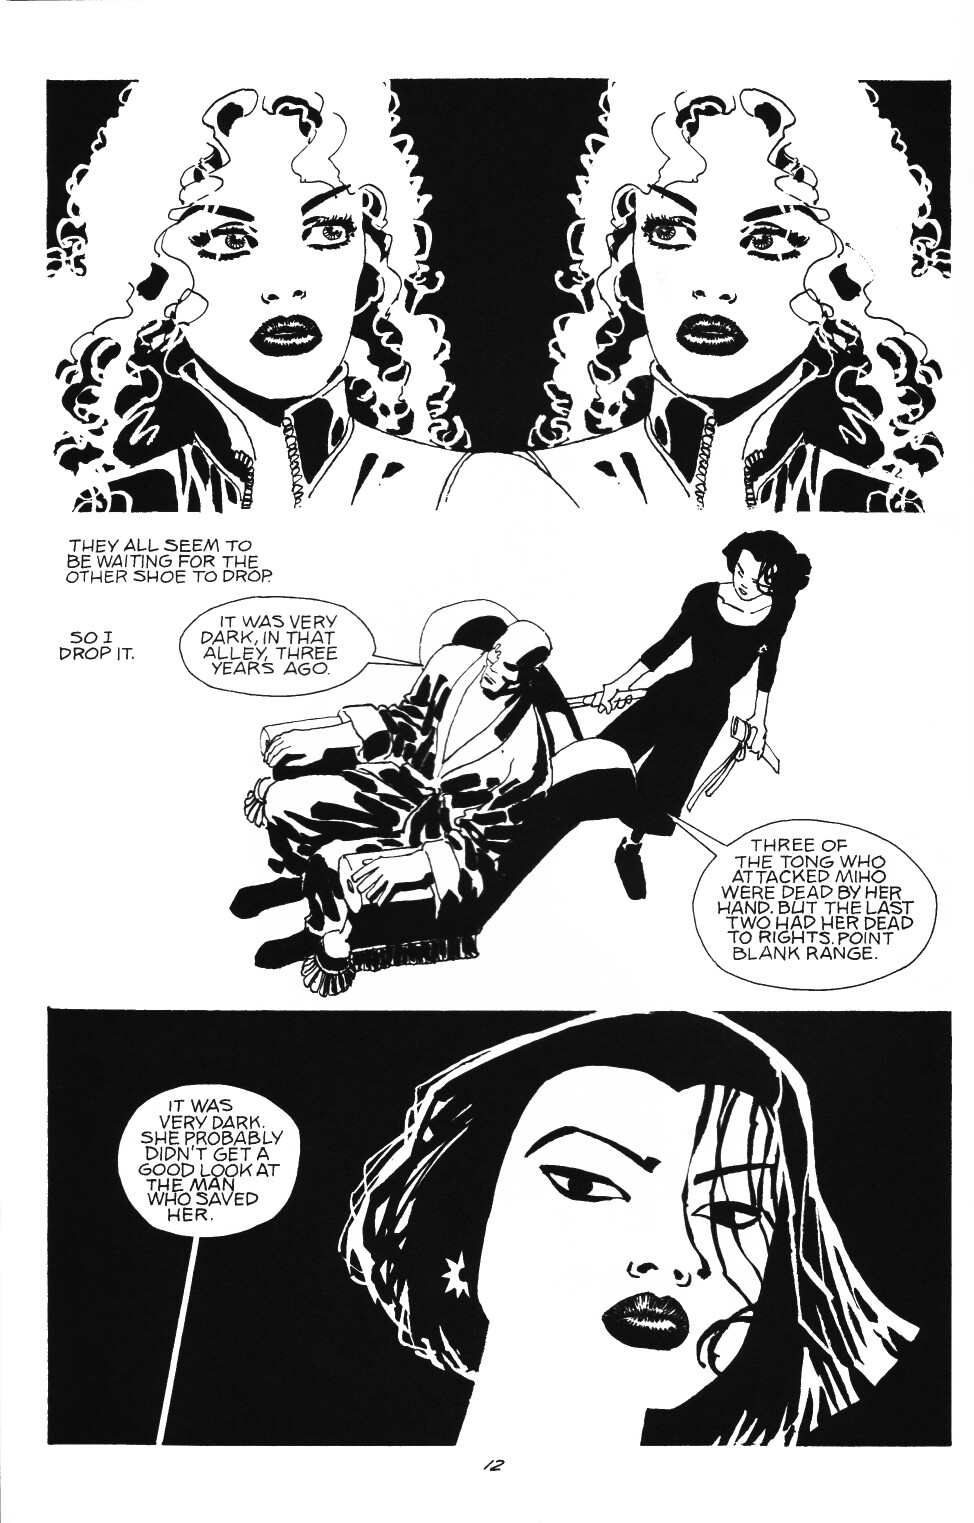 Sin City: A Dame To Kill For Episode 5-A